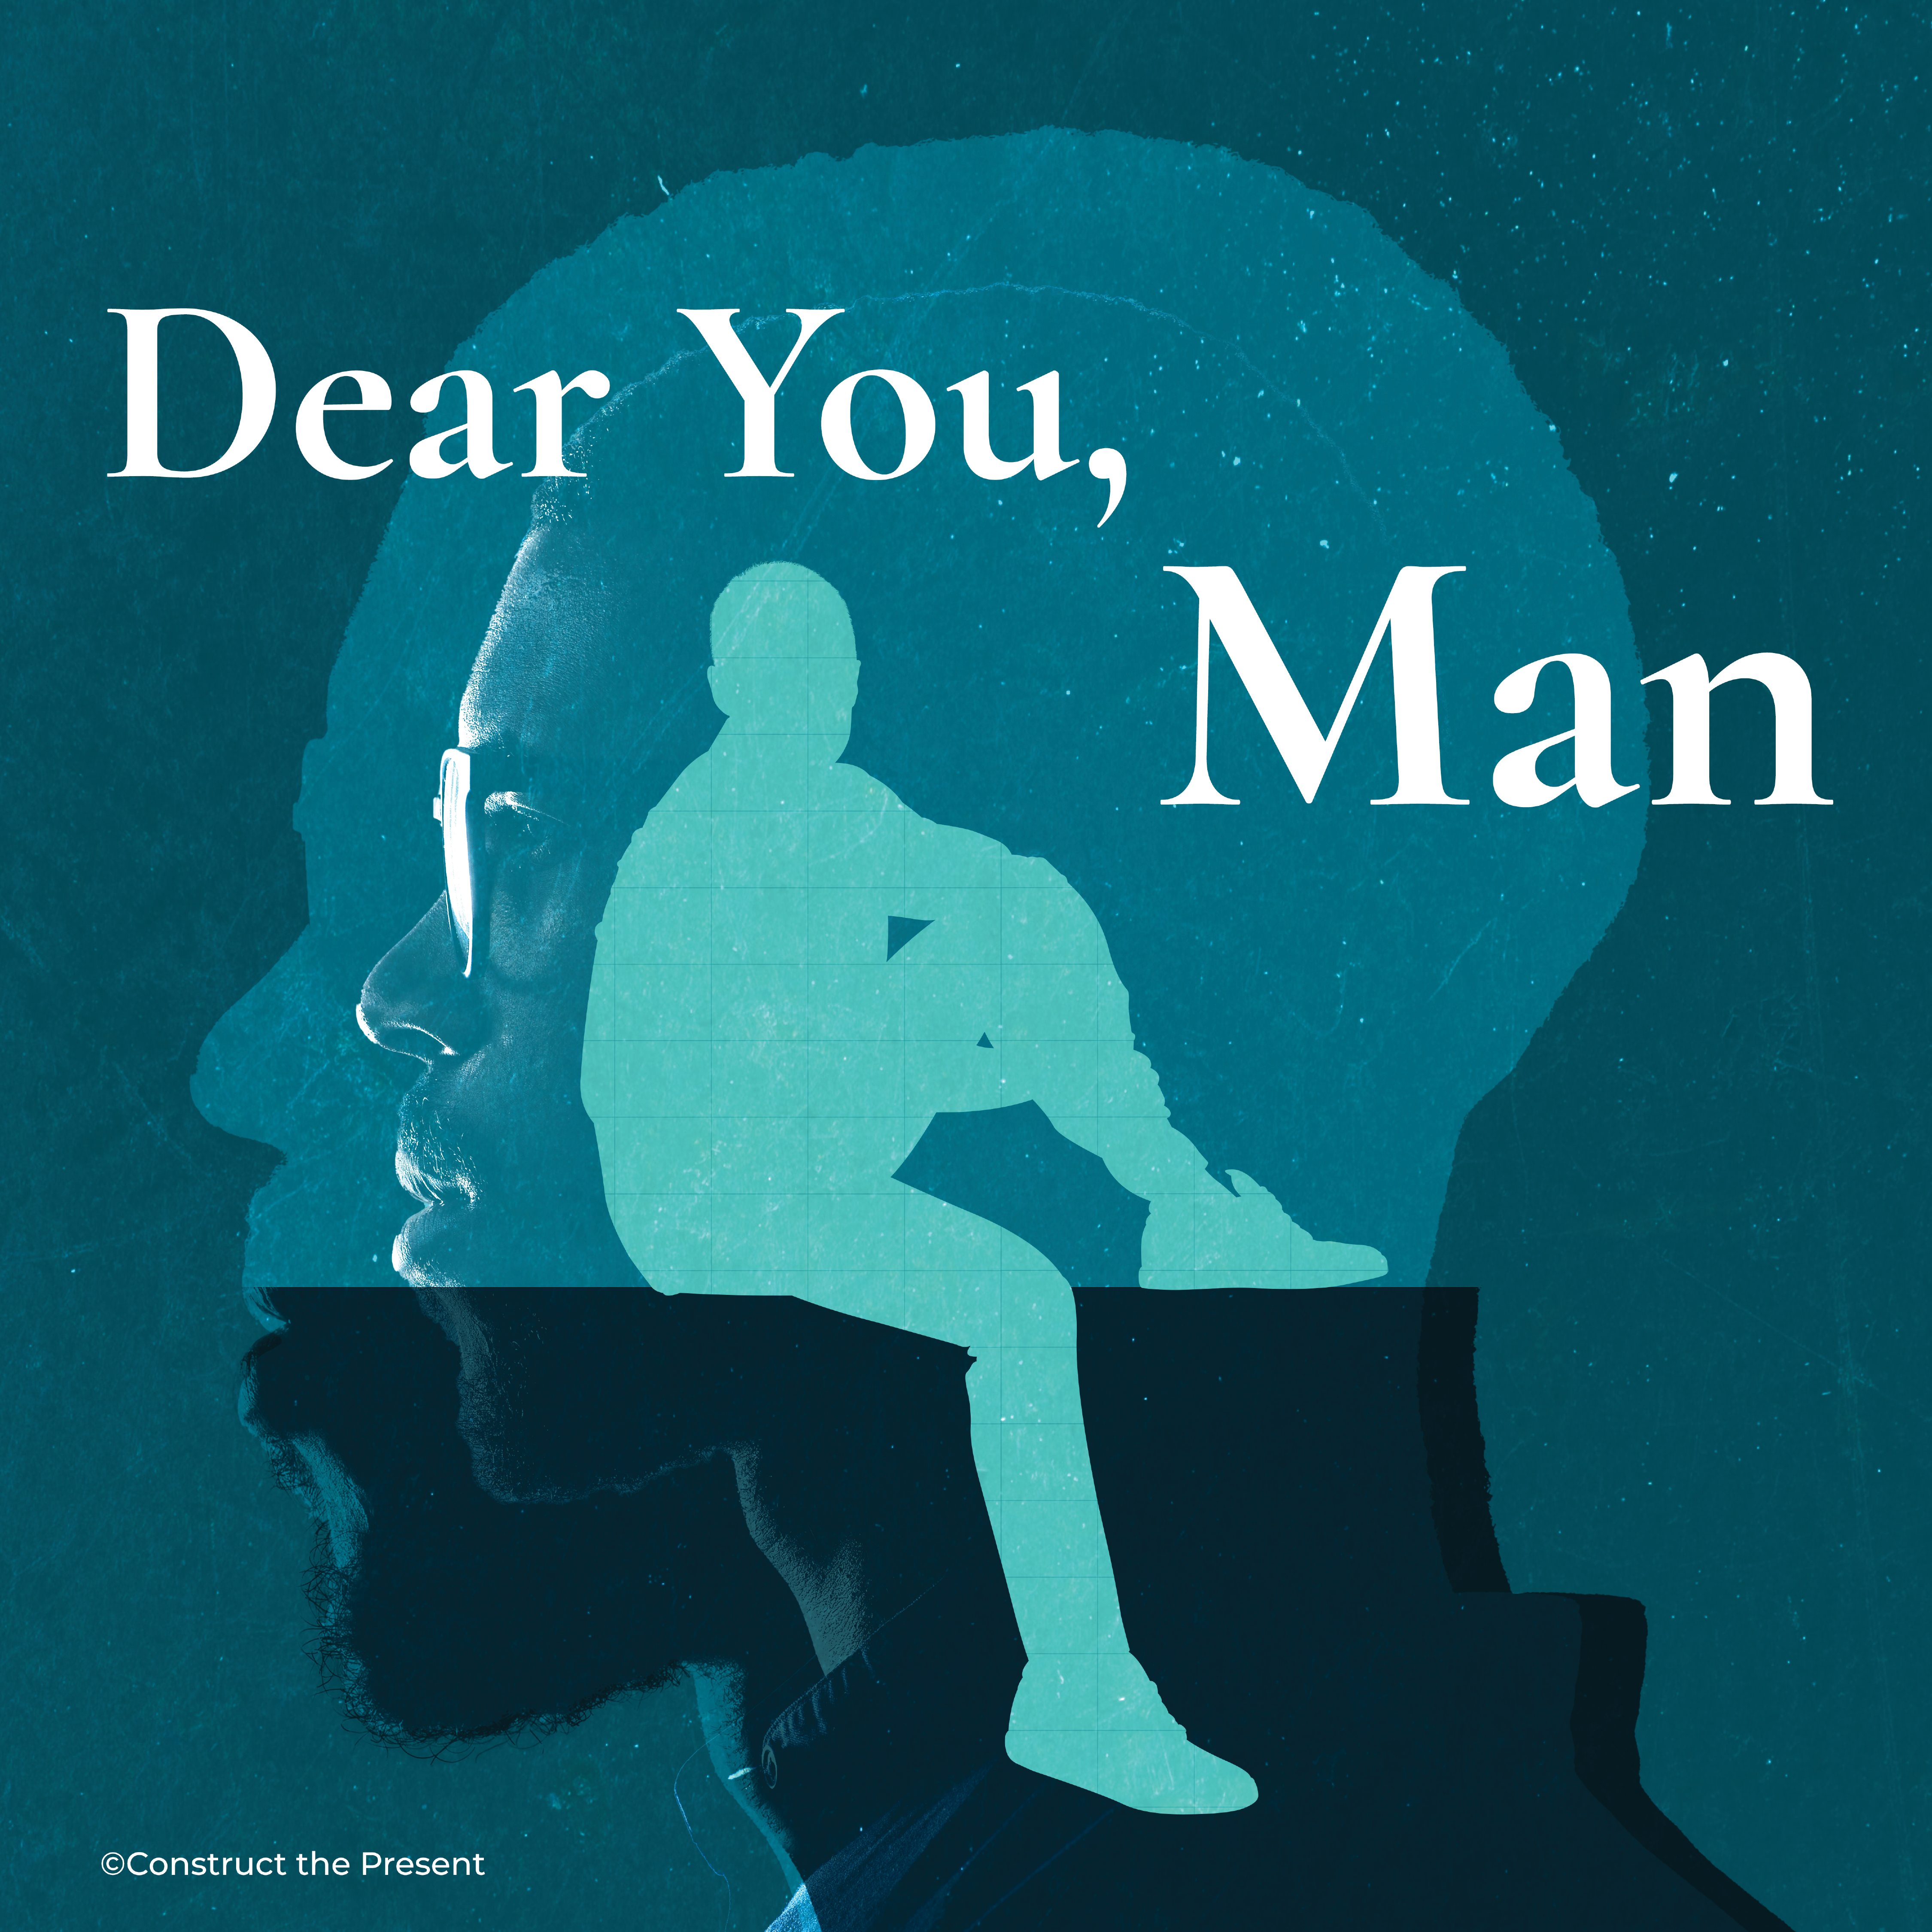 Man to Man: A Letter From Your Brother